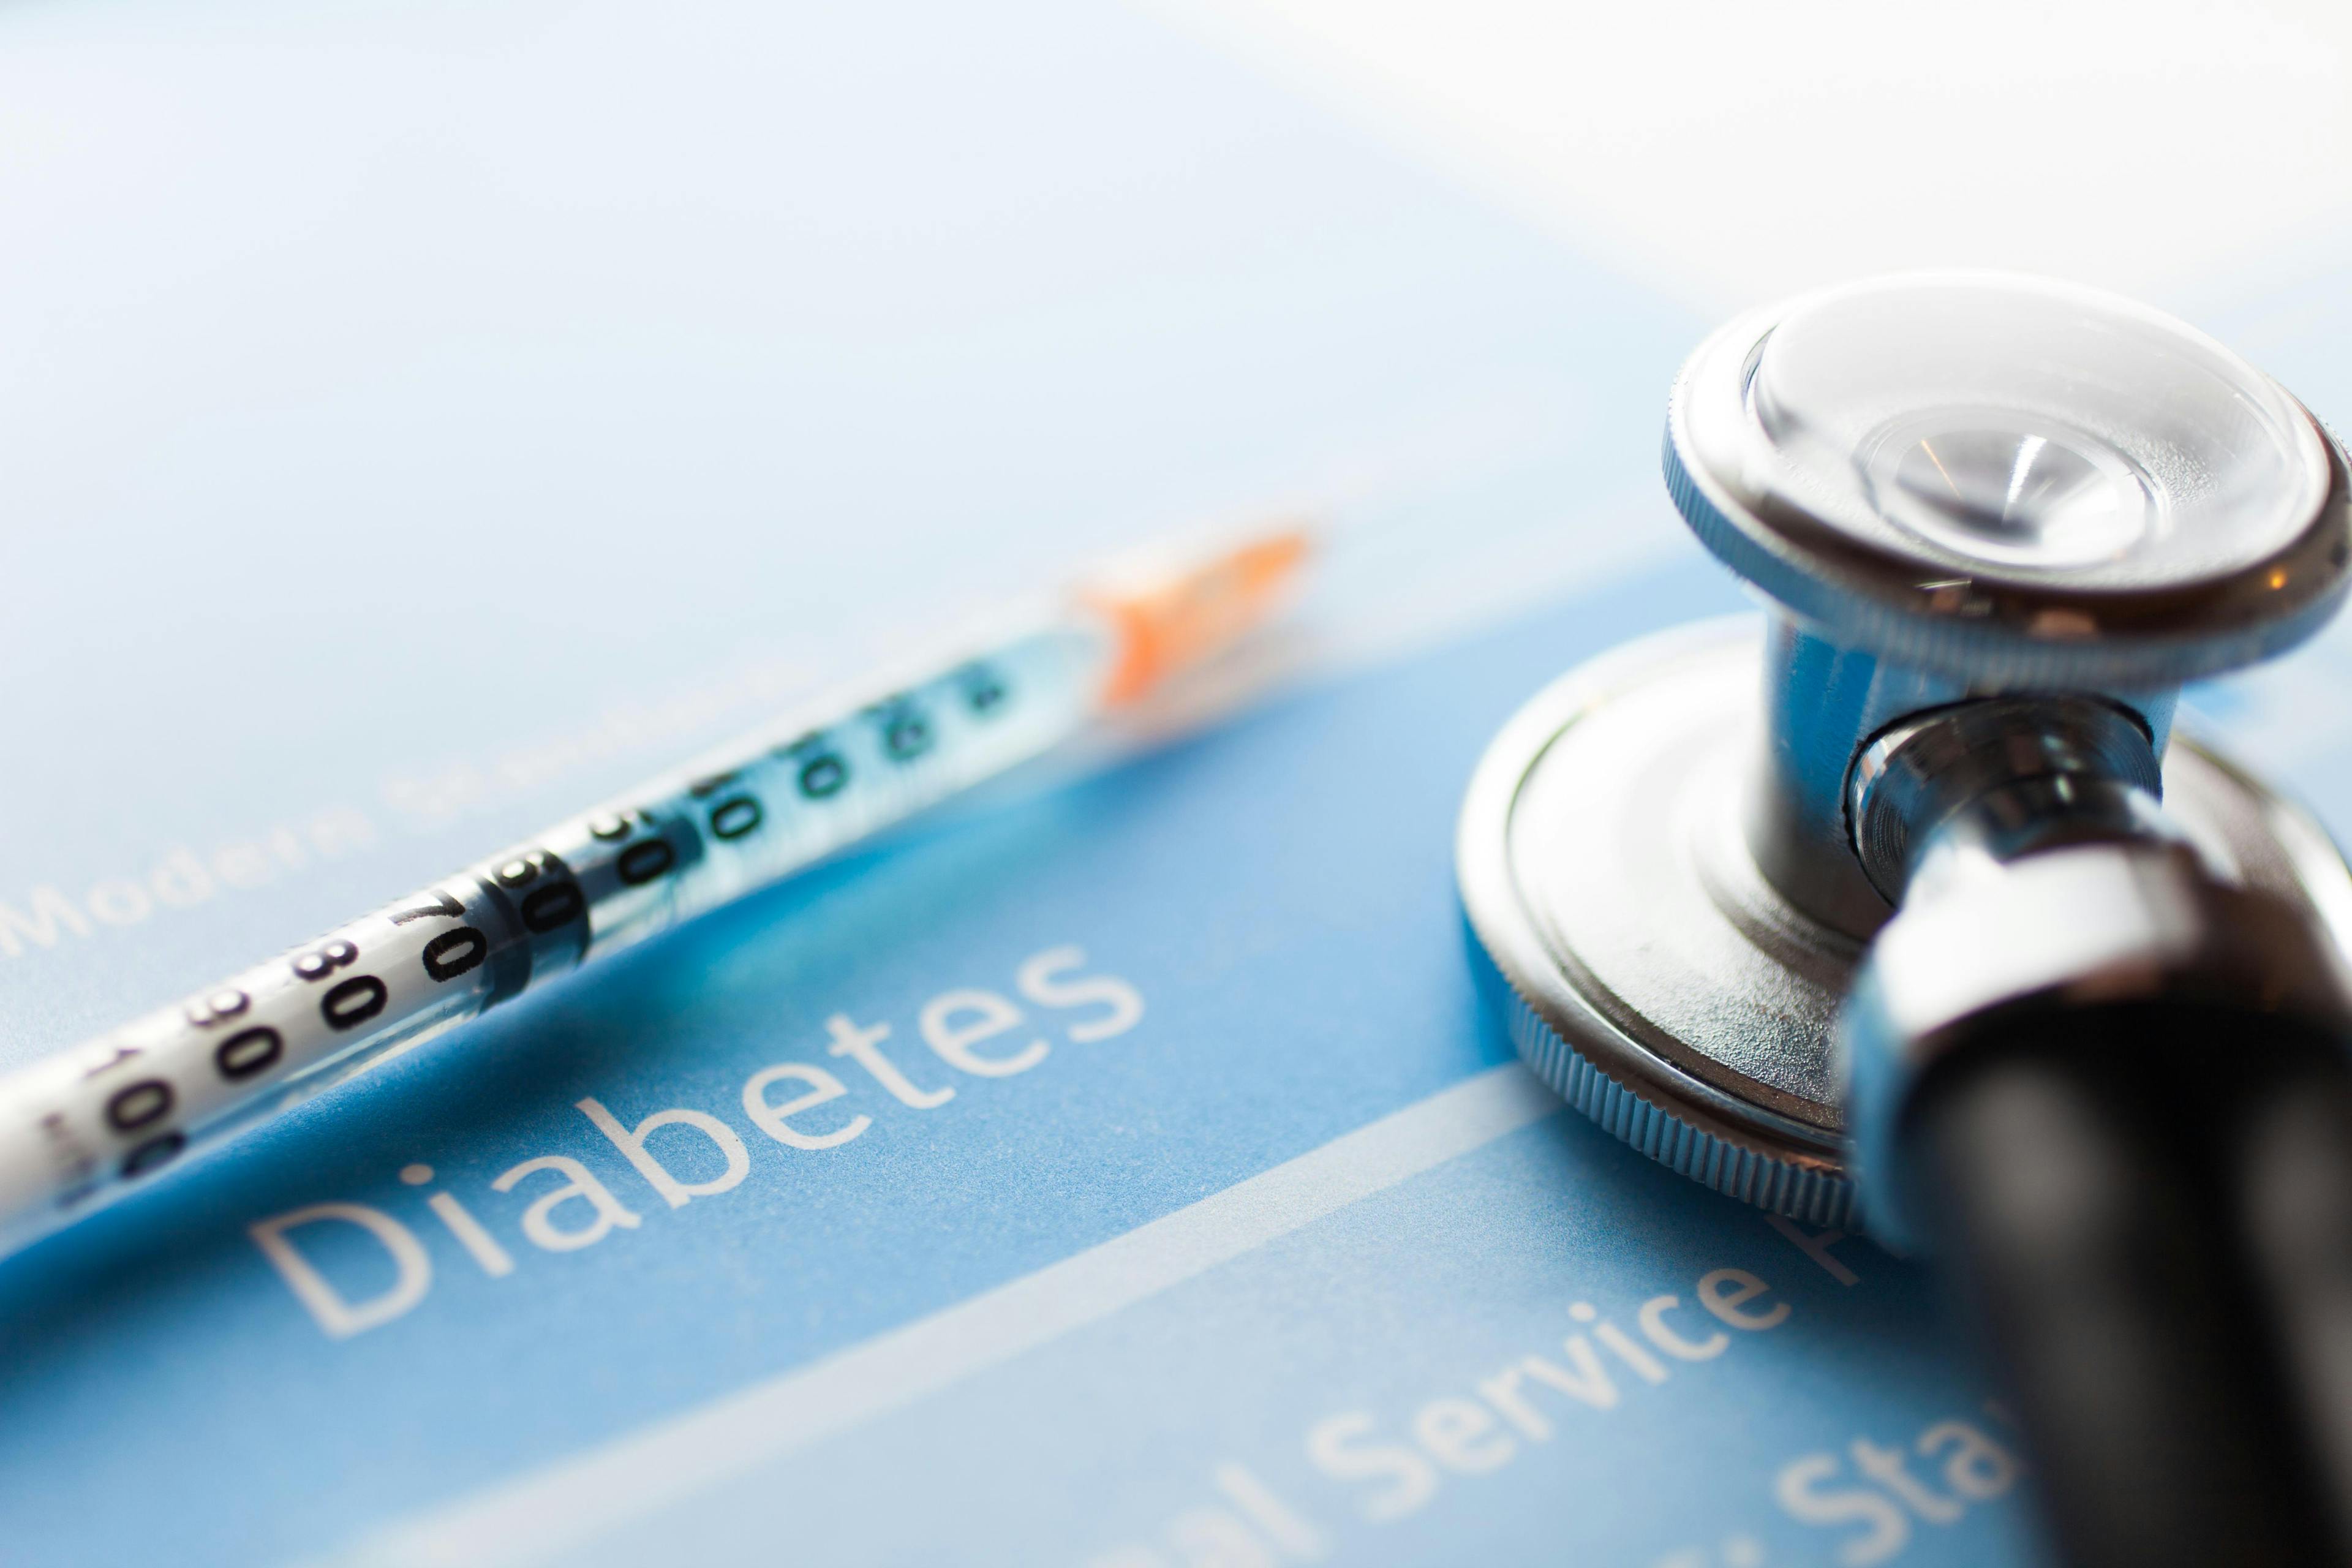 Stock imagery related to hypoglycemia management, including a syringe with insulin.